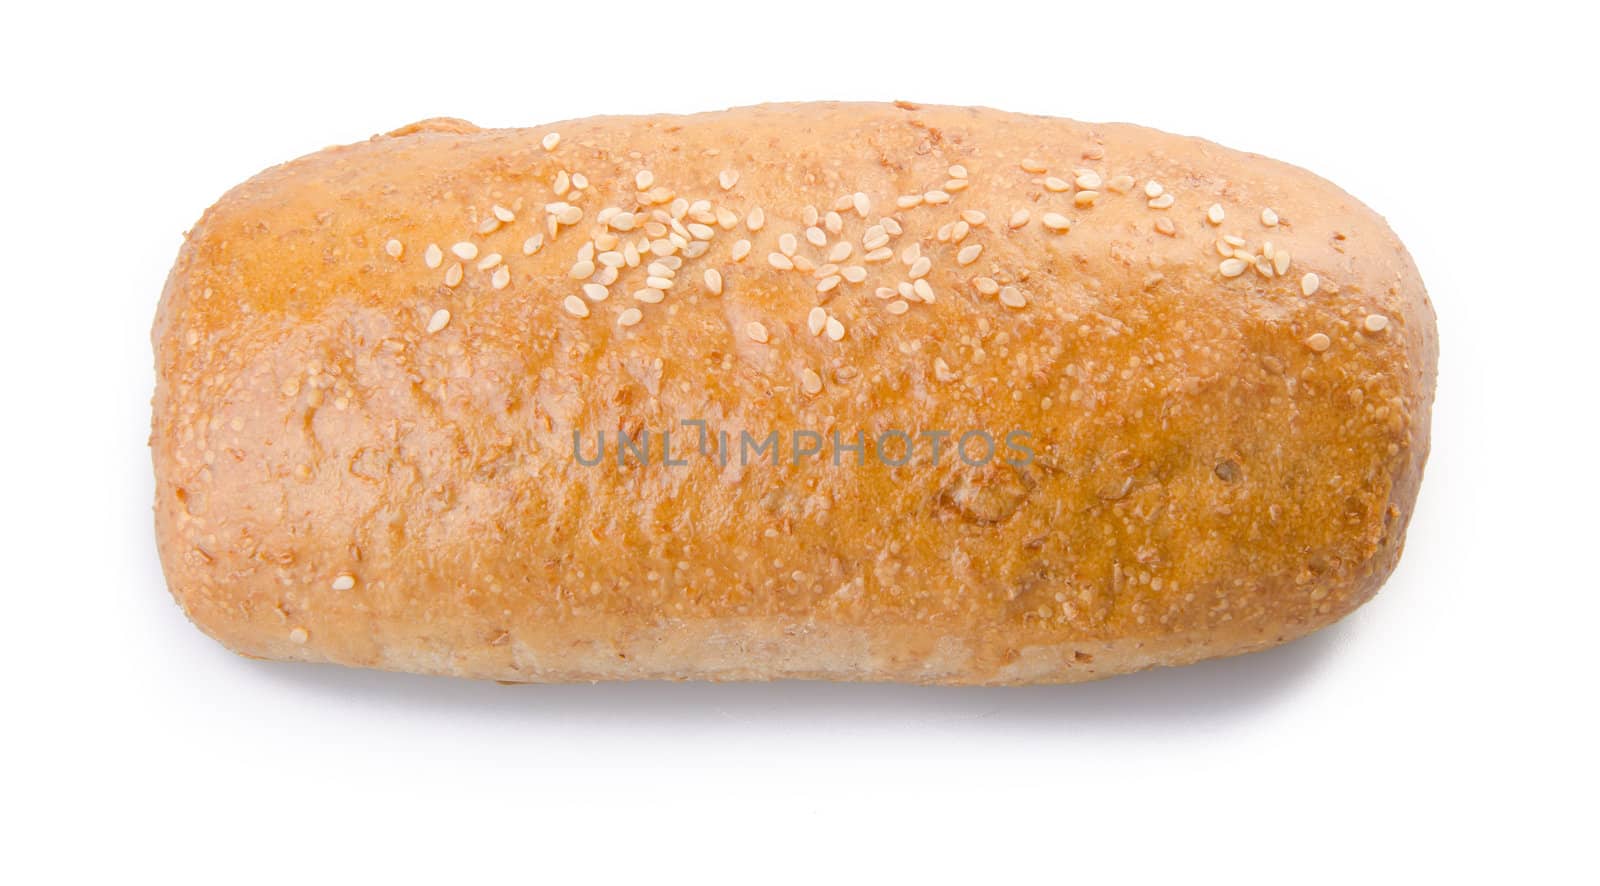 bread, homemade whole wheat bread on a white background